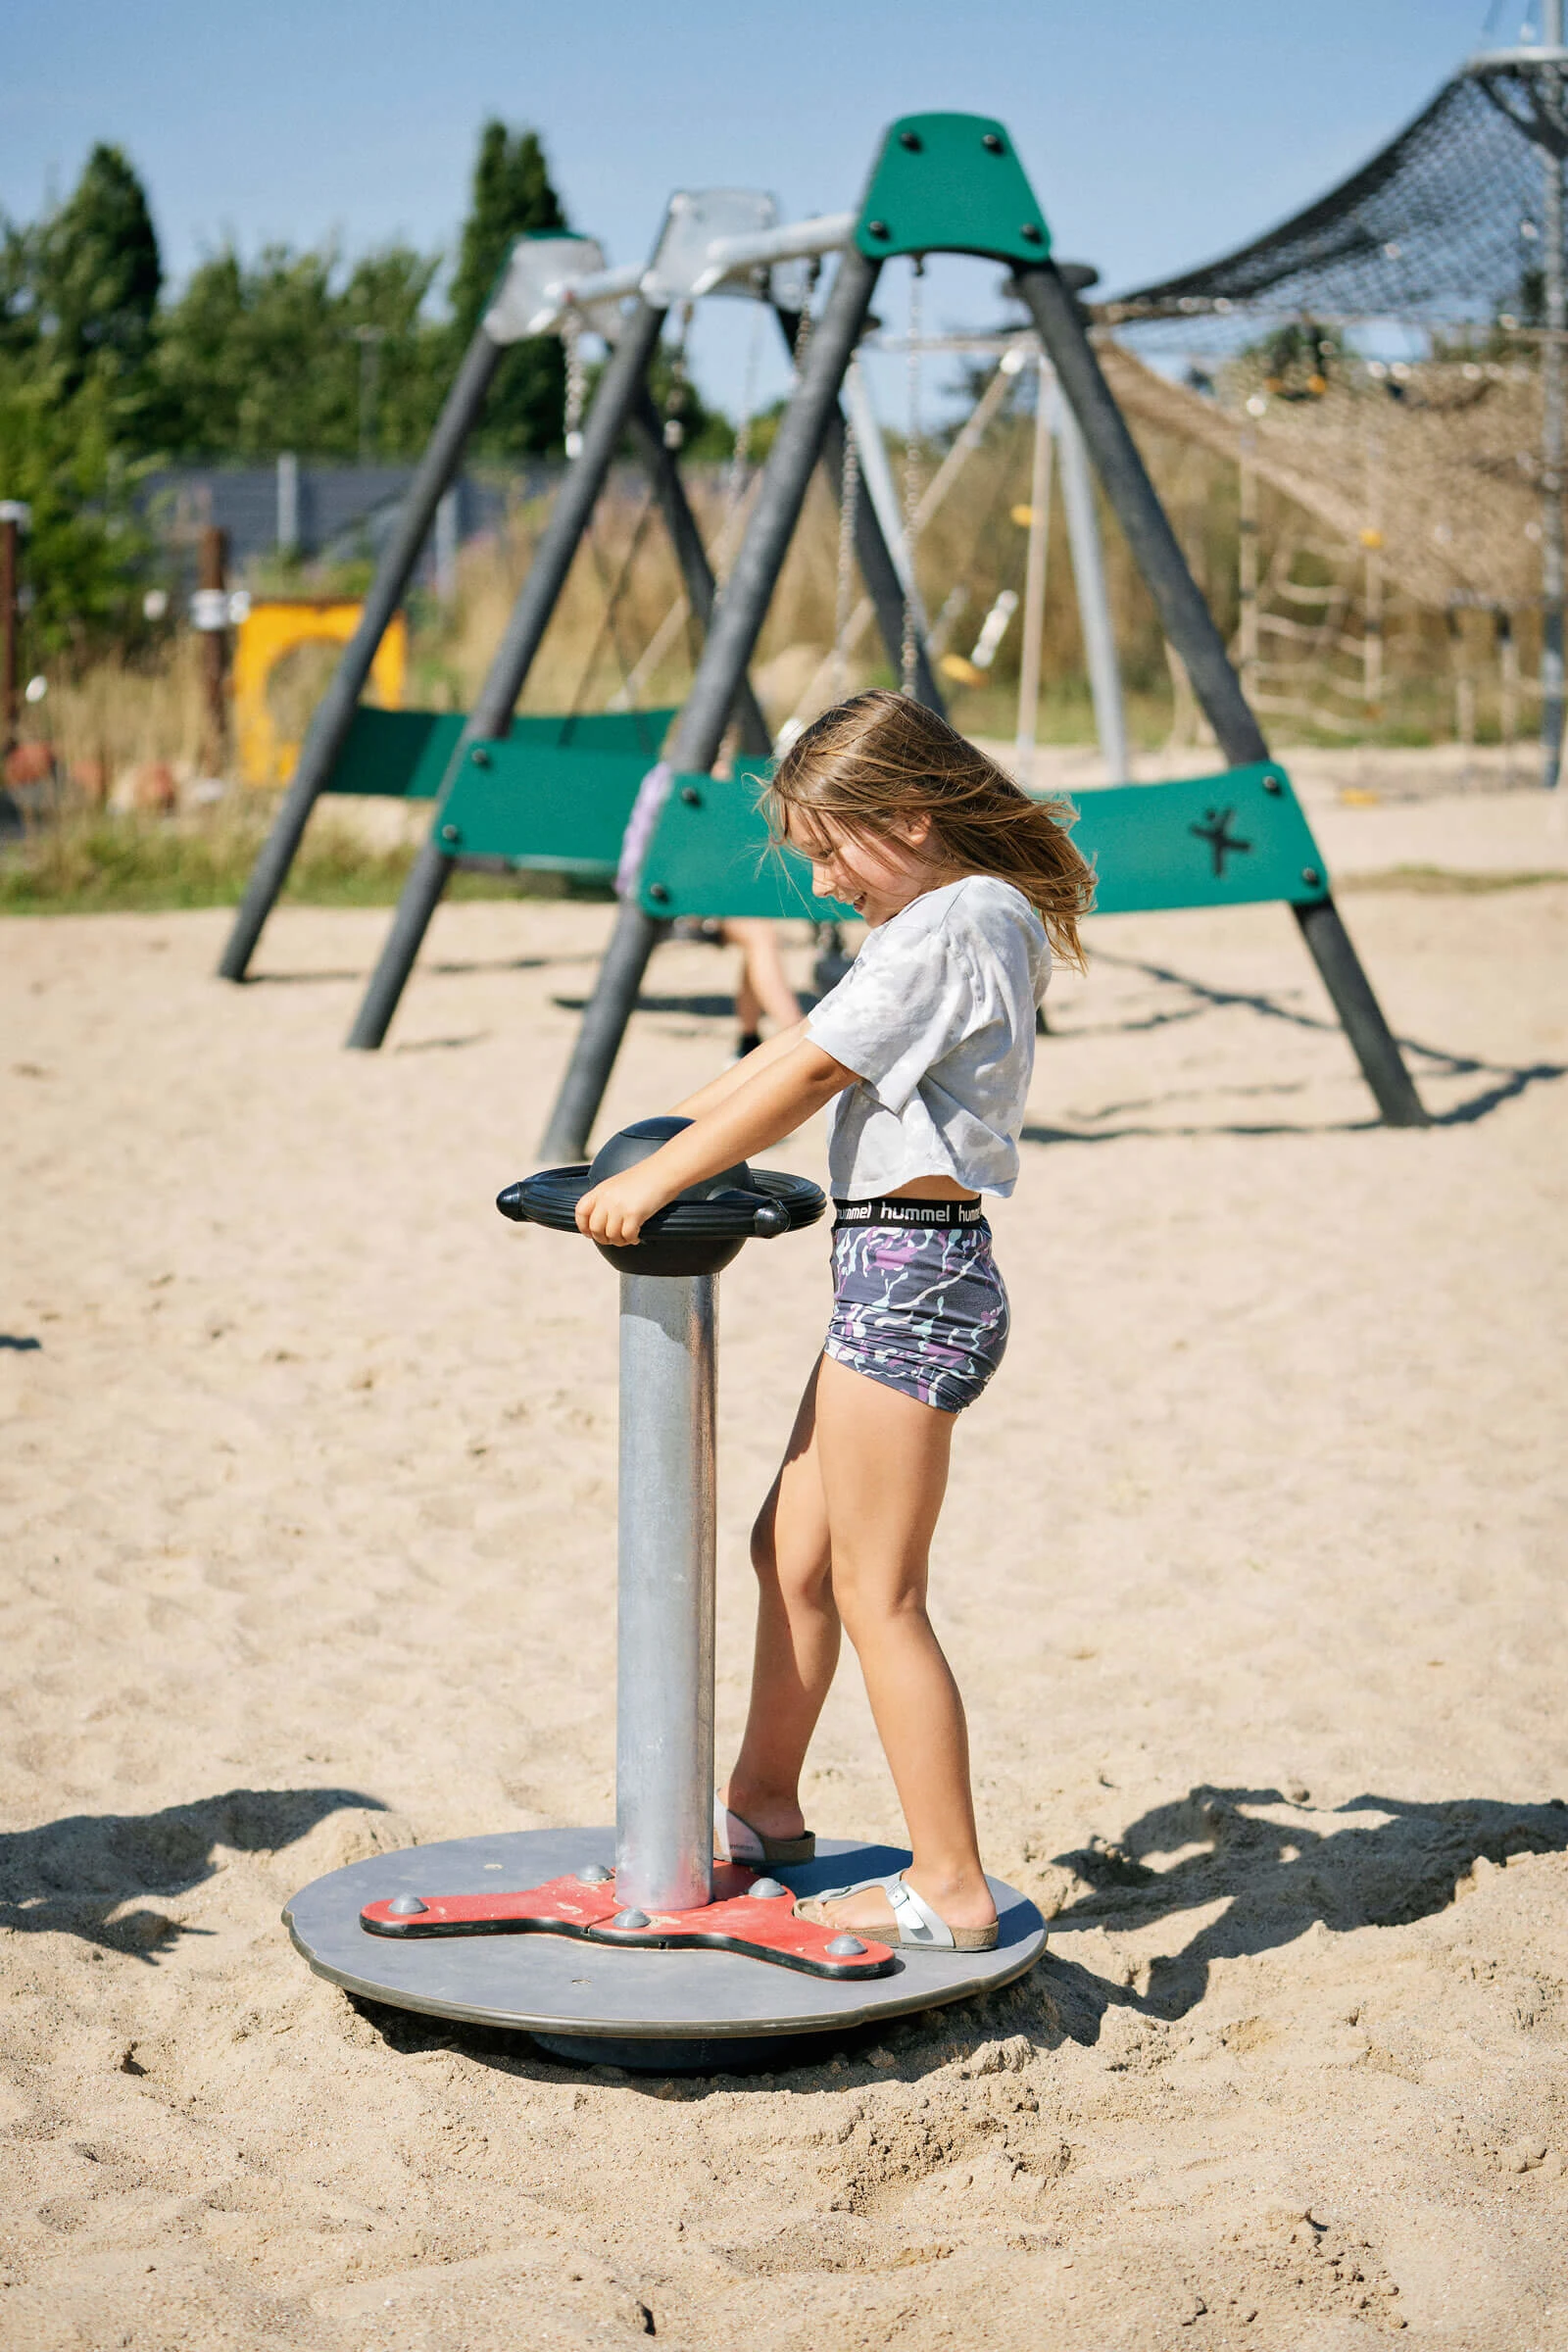 Proper hand support for spinning playground equipment